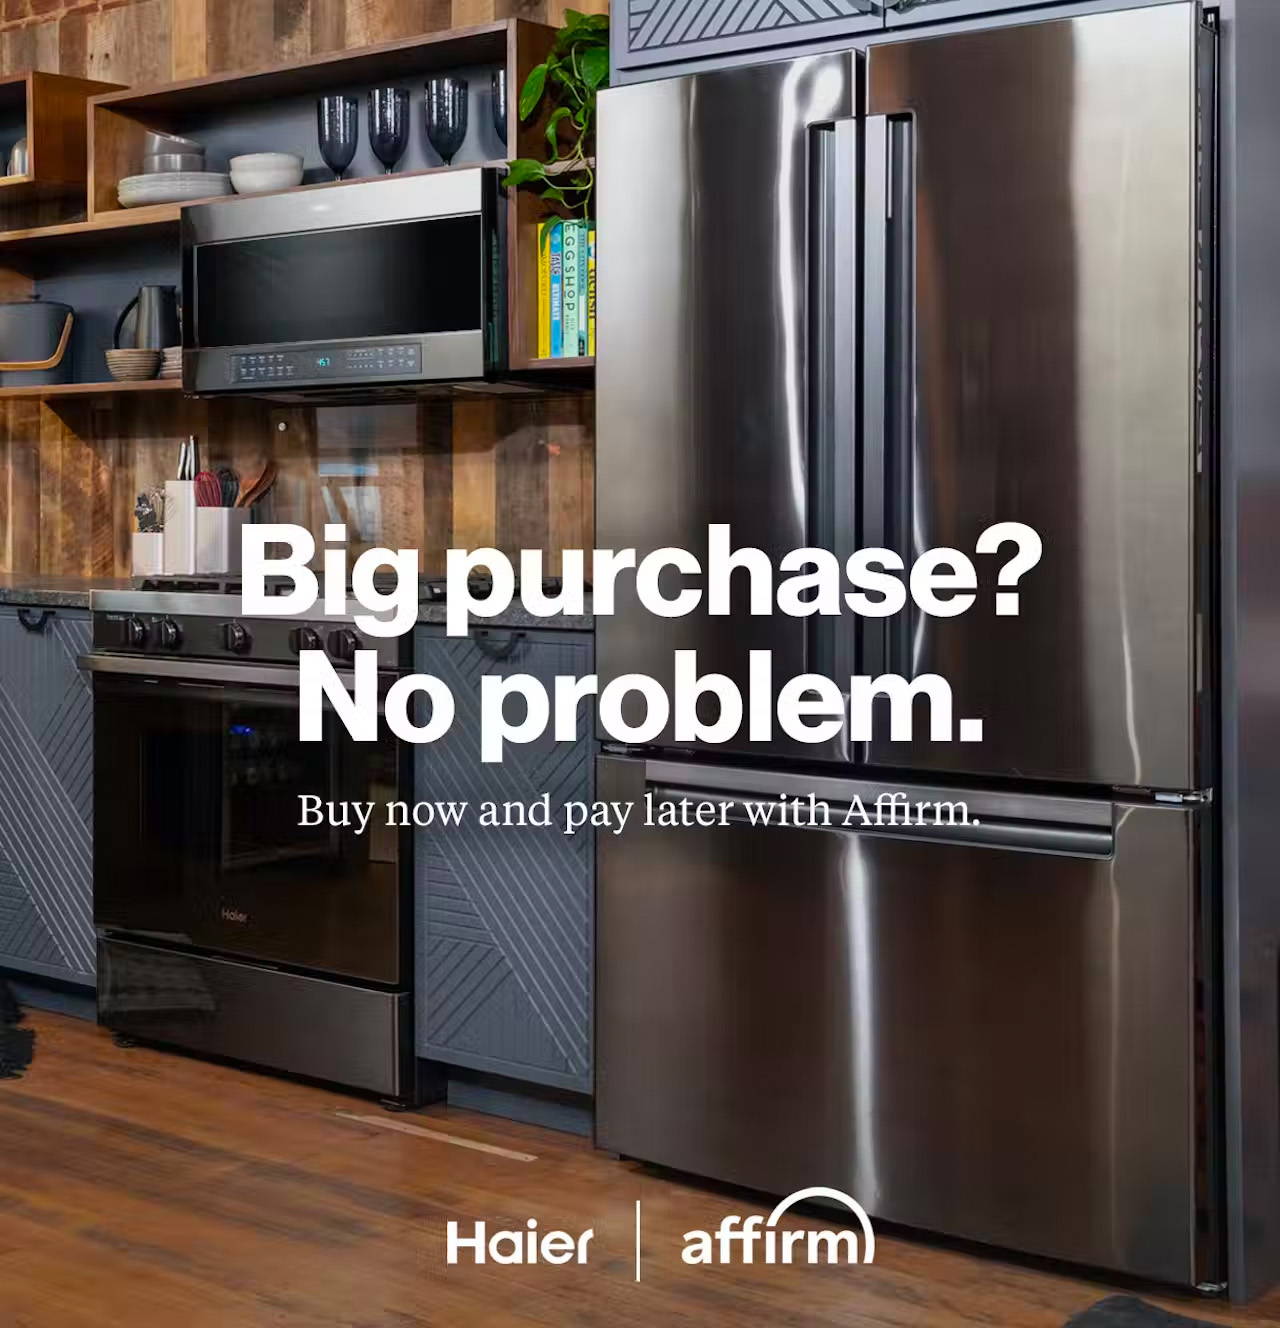 Stainless steel Haier french-door refrigerator, gas range and microwave in a trendy kitchen. Haier and Affirm logos are at the bottom of the photo.